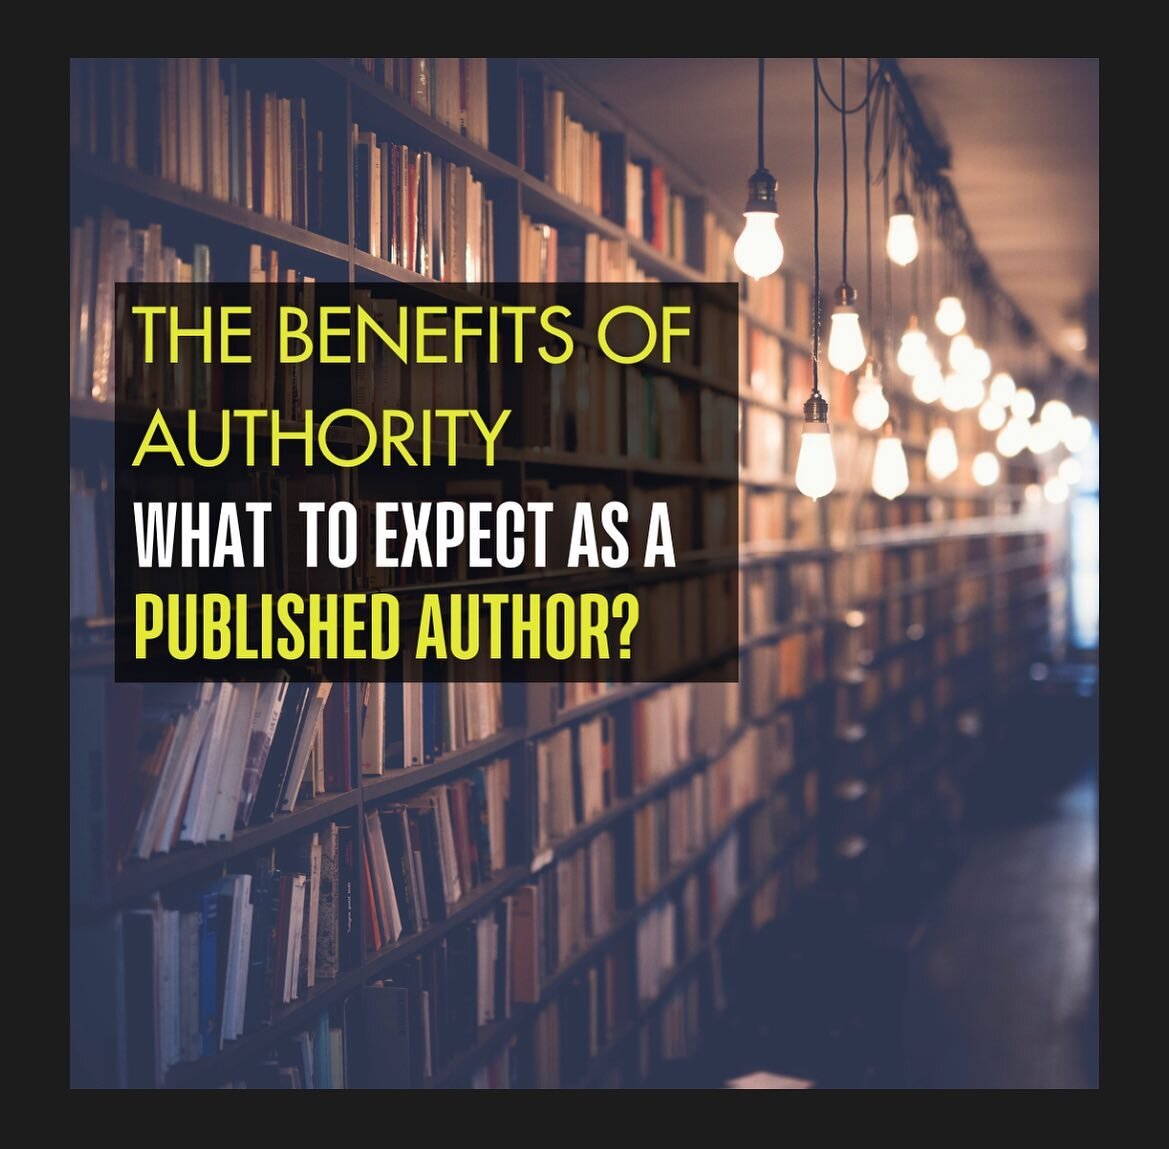 There are so many benefits of authority! How to gain more authority? Write and publish a well-written book. Don&rsquo;t write a &ldquo;throw-away&rdquo; business card book. Go to the &ldquo;Thought Bank&rdquo; at poignantpress.com to read more about 